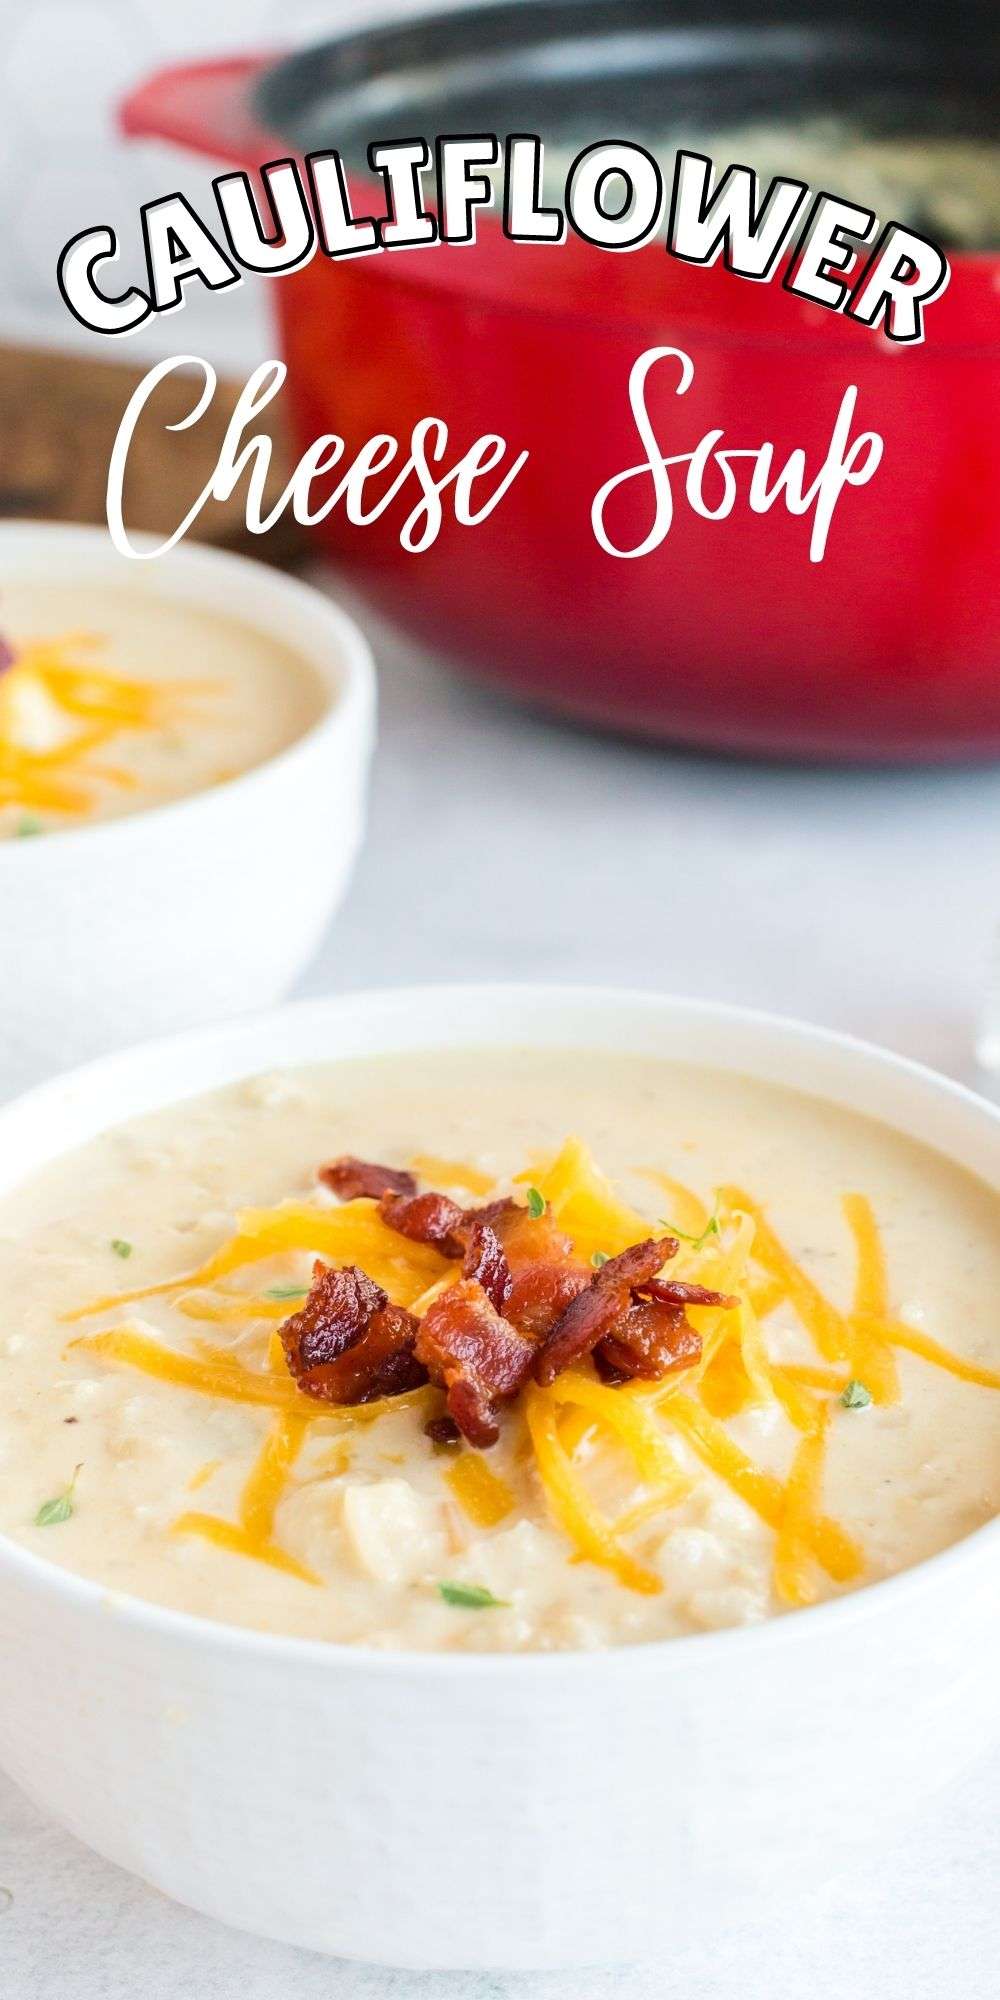 You can make the low carb, Cauliflower Cheese Soup even more delicious by serving it topped with bacon, grated cheese, and fresh thyme. via @familyfresh